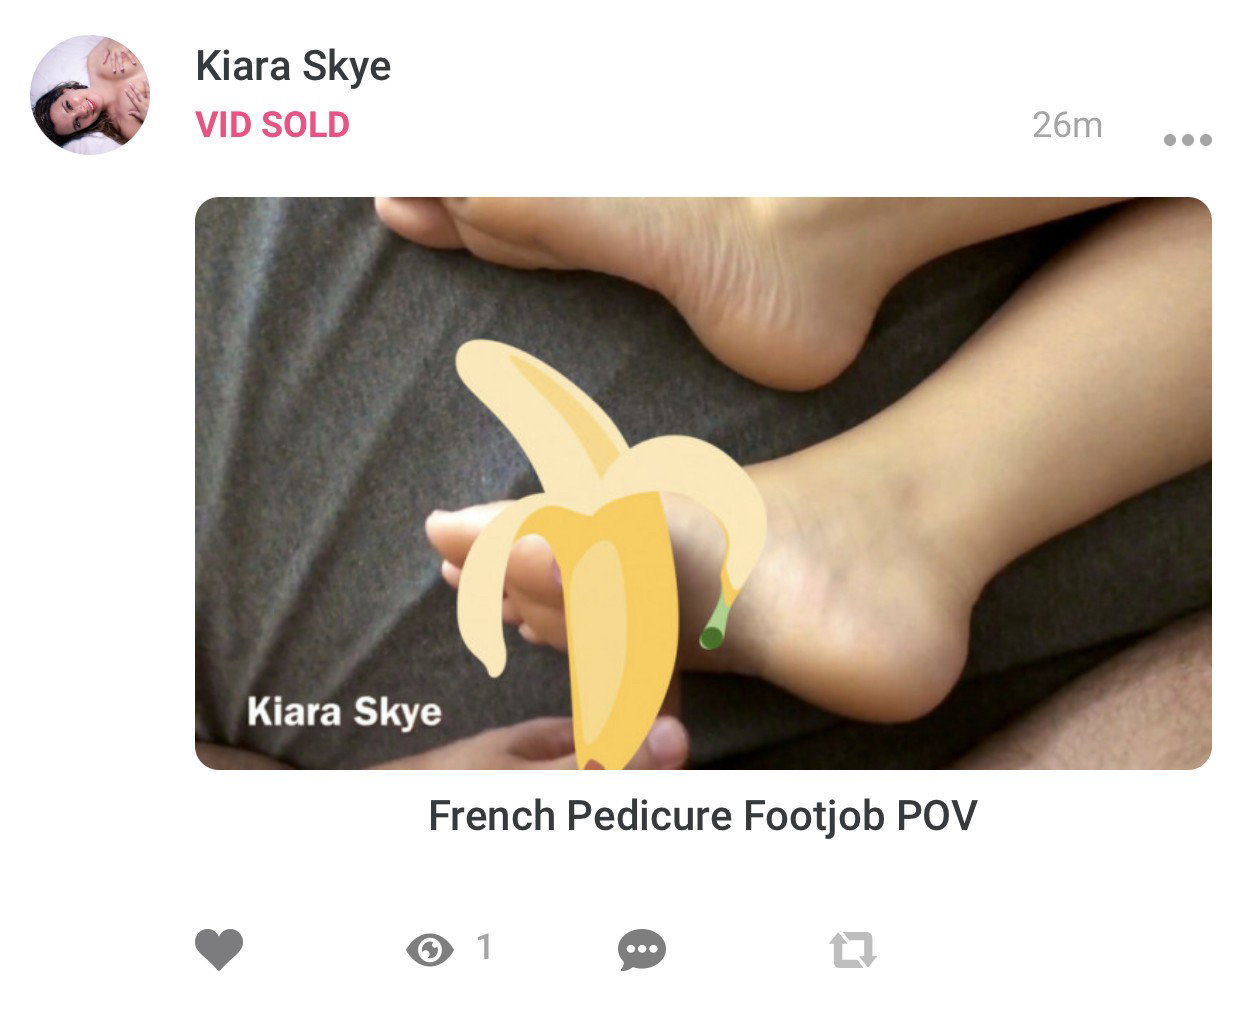 Photo by Kiara Skye with the username @KiaraSkye, who is a star user,  April 4, 2020 at 7:07 PM. The post is about the topic Foot Fetish and the text says 'SOLD SOLD SOLD! 💸💸💸💸

Get yours at https://kiaravids.com 🎬


#feet #footjob #fj #pedicure #toes #bg #pawg #thick #footfetish #domme #findom #femdom #soles #wetfeet #pussy #amateur #brunette'